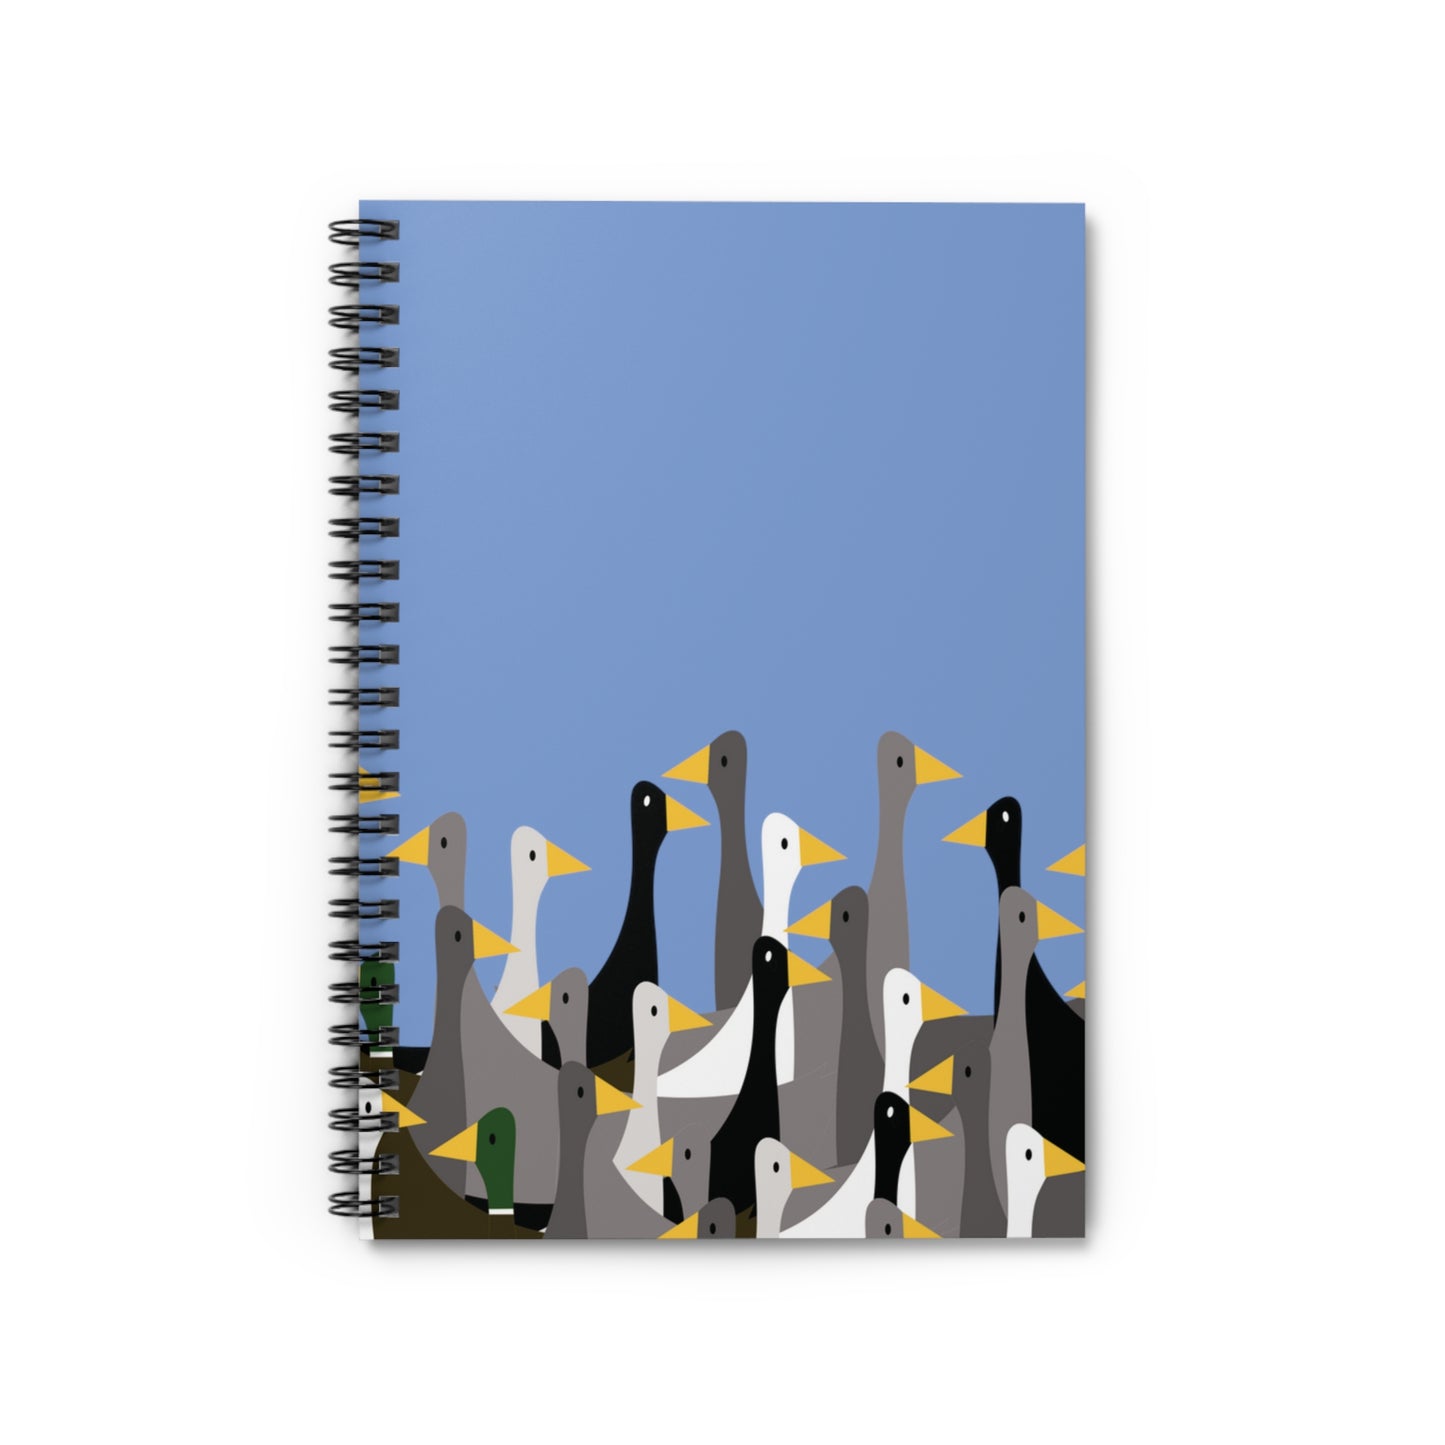 Not as many ducks - Fennel Flower 74a6ff - Spiral Notebook - Ruled Line